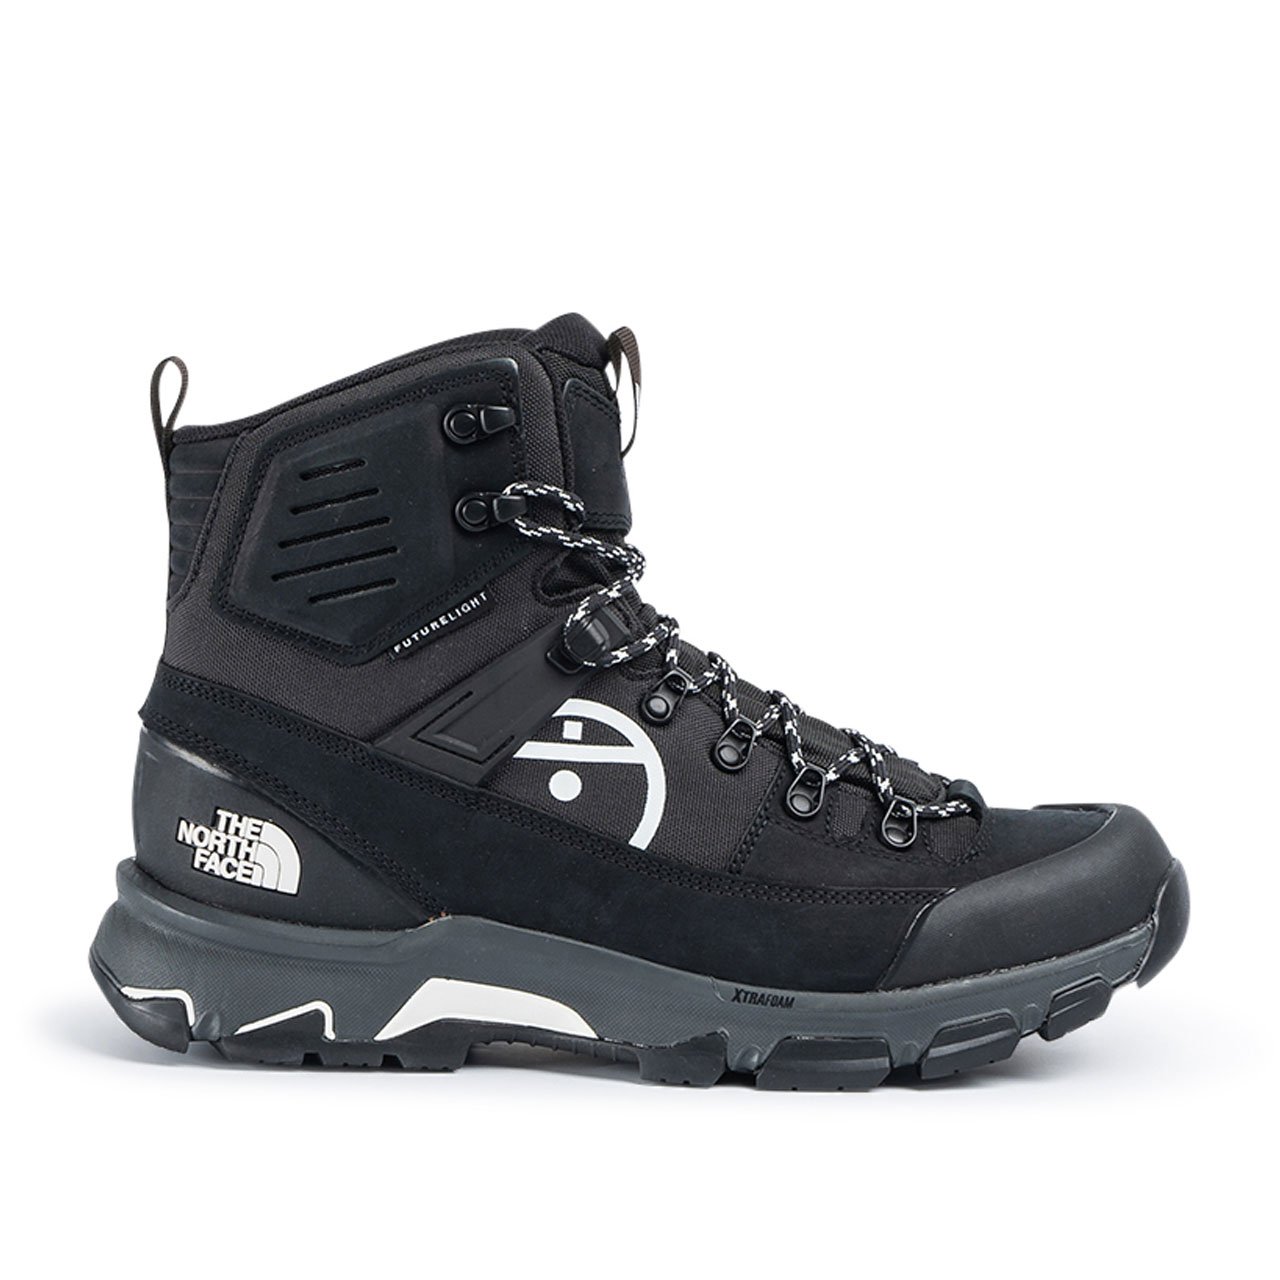 the north face black series steep tech crestvale boots (black) - nf0a4t2nky4 - a.plus - Image - 1